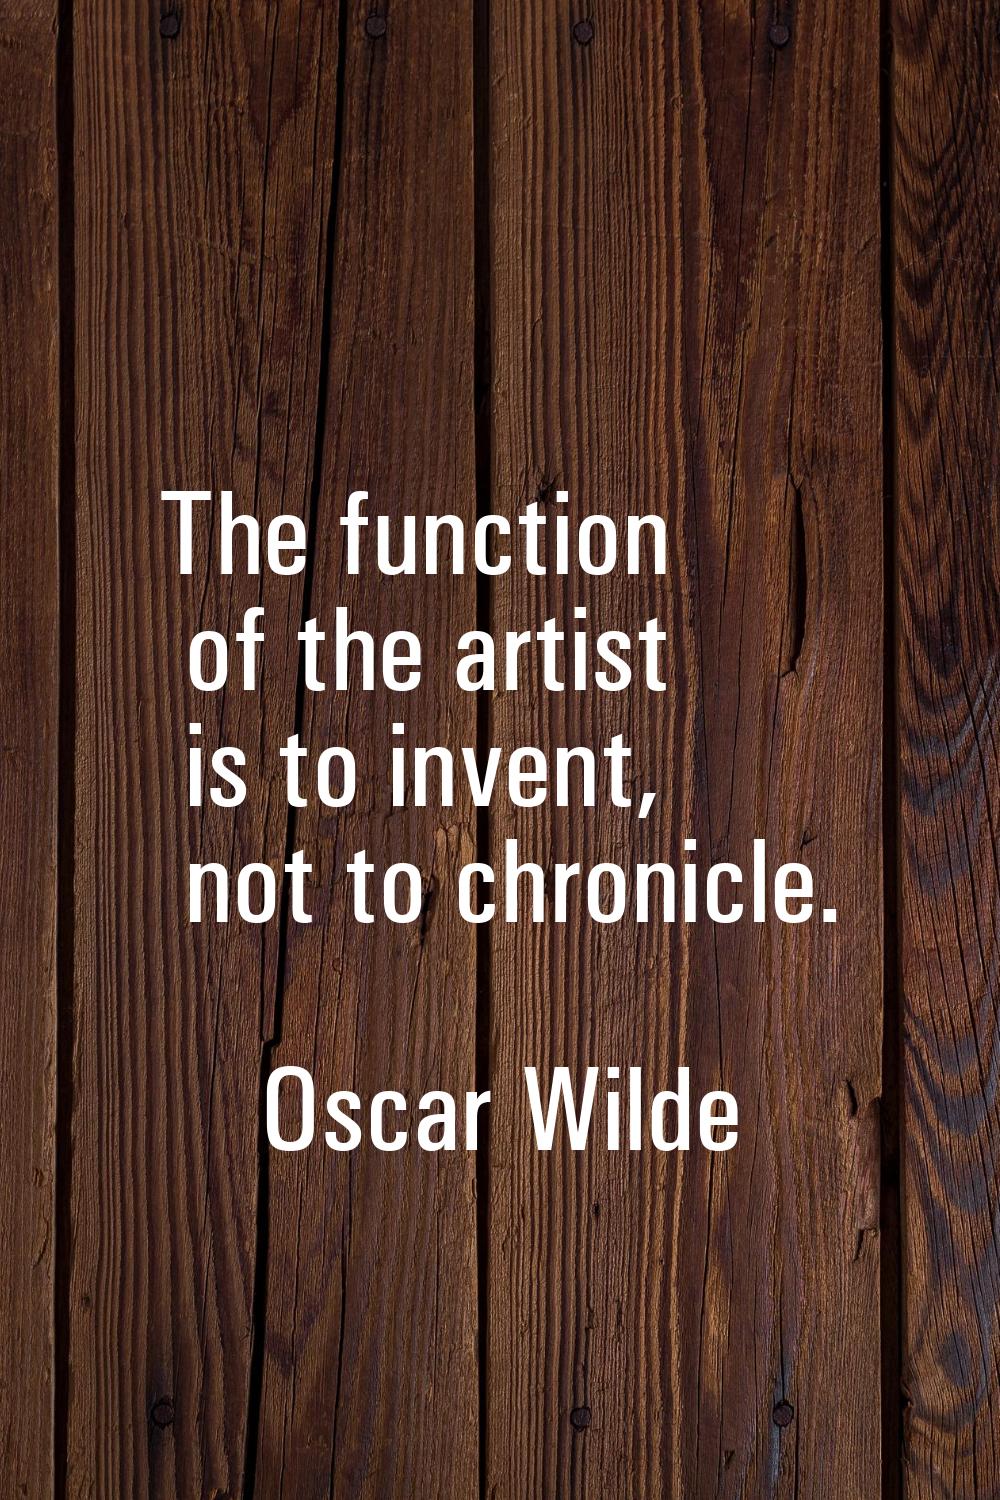 The function of the artist is to invent, not to chronicle.